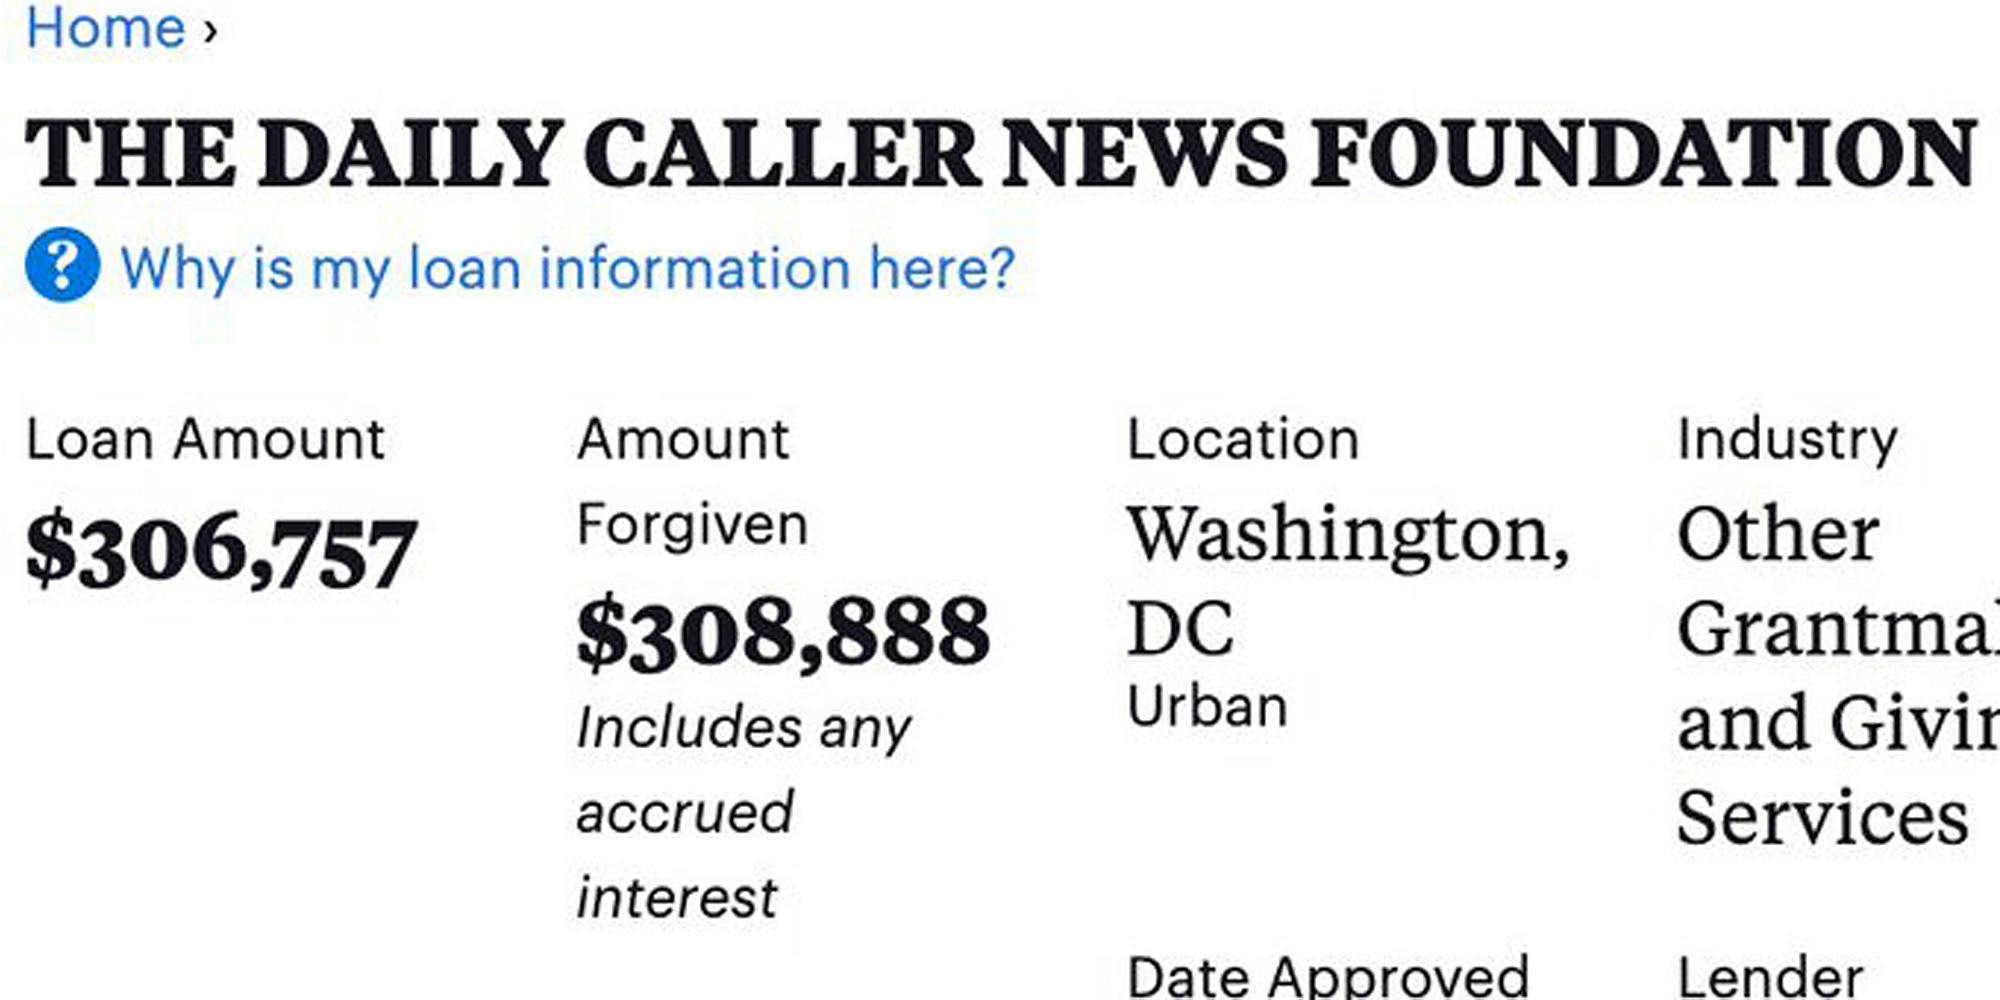 "THE DAILY CALLER NEWS FOUNDATION" Loan Amount $306,757 Amount Forgiven $308,888 Location Washington DC Urban Industry Other Grantma.. and Givin.. Services Date Approved Lender" on white background